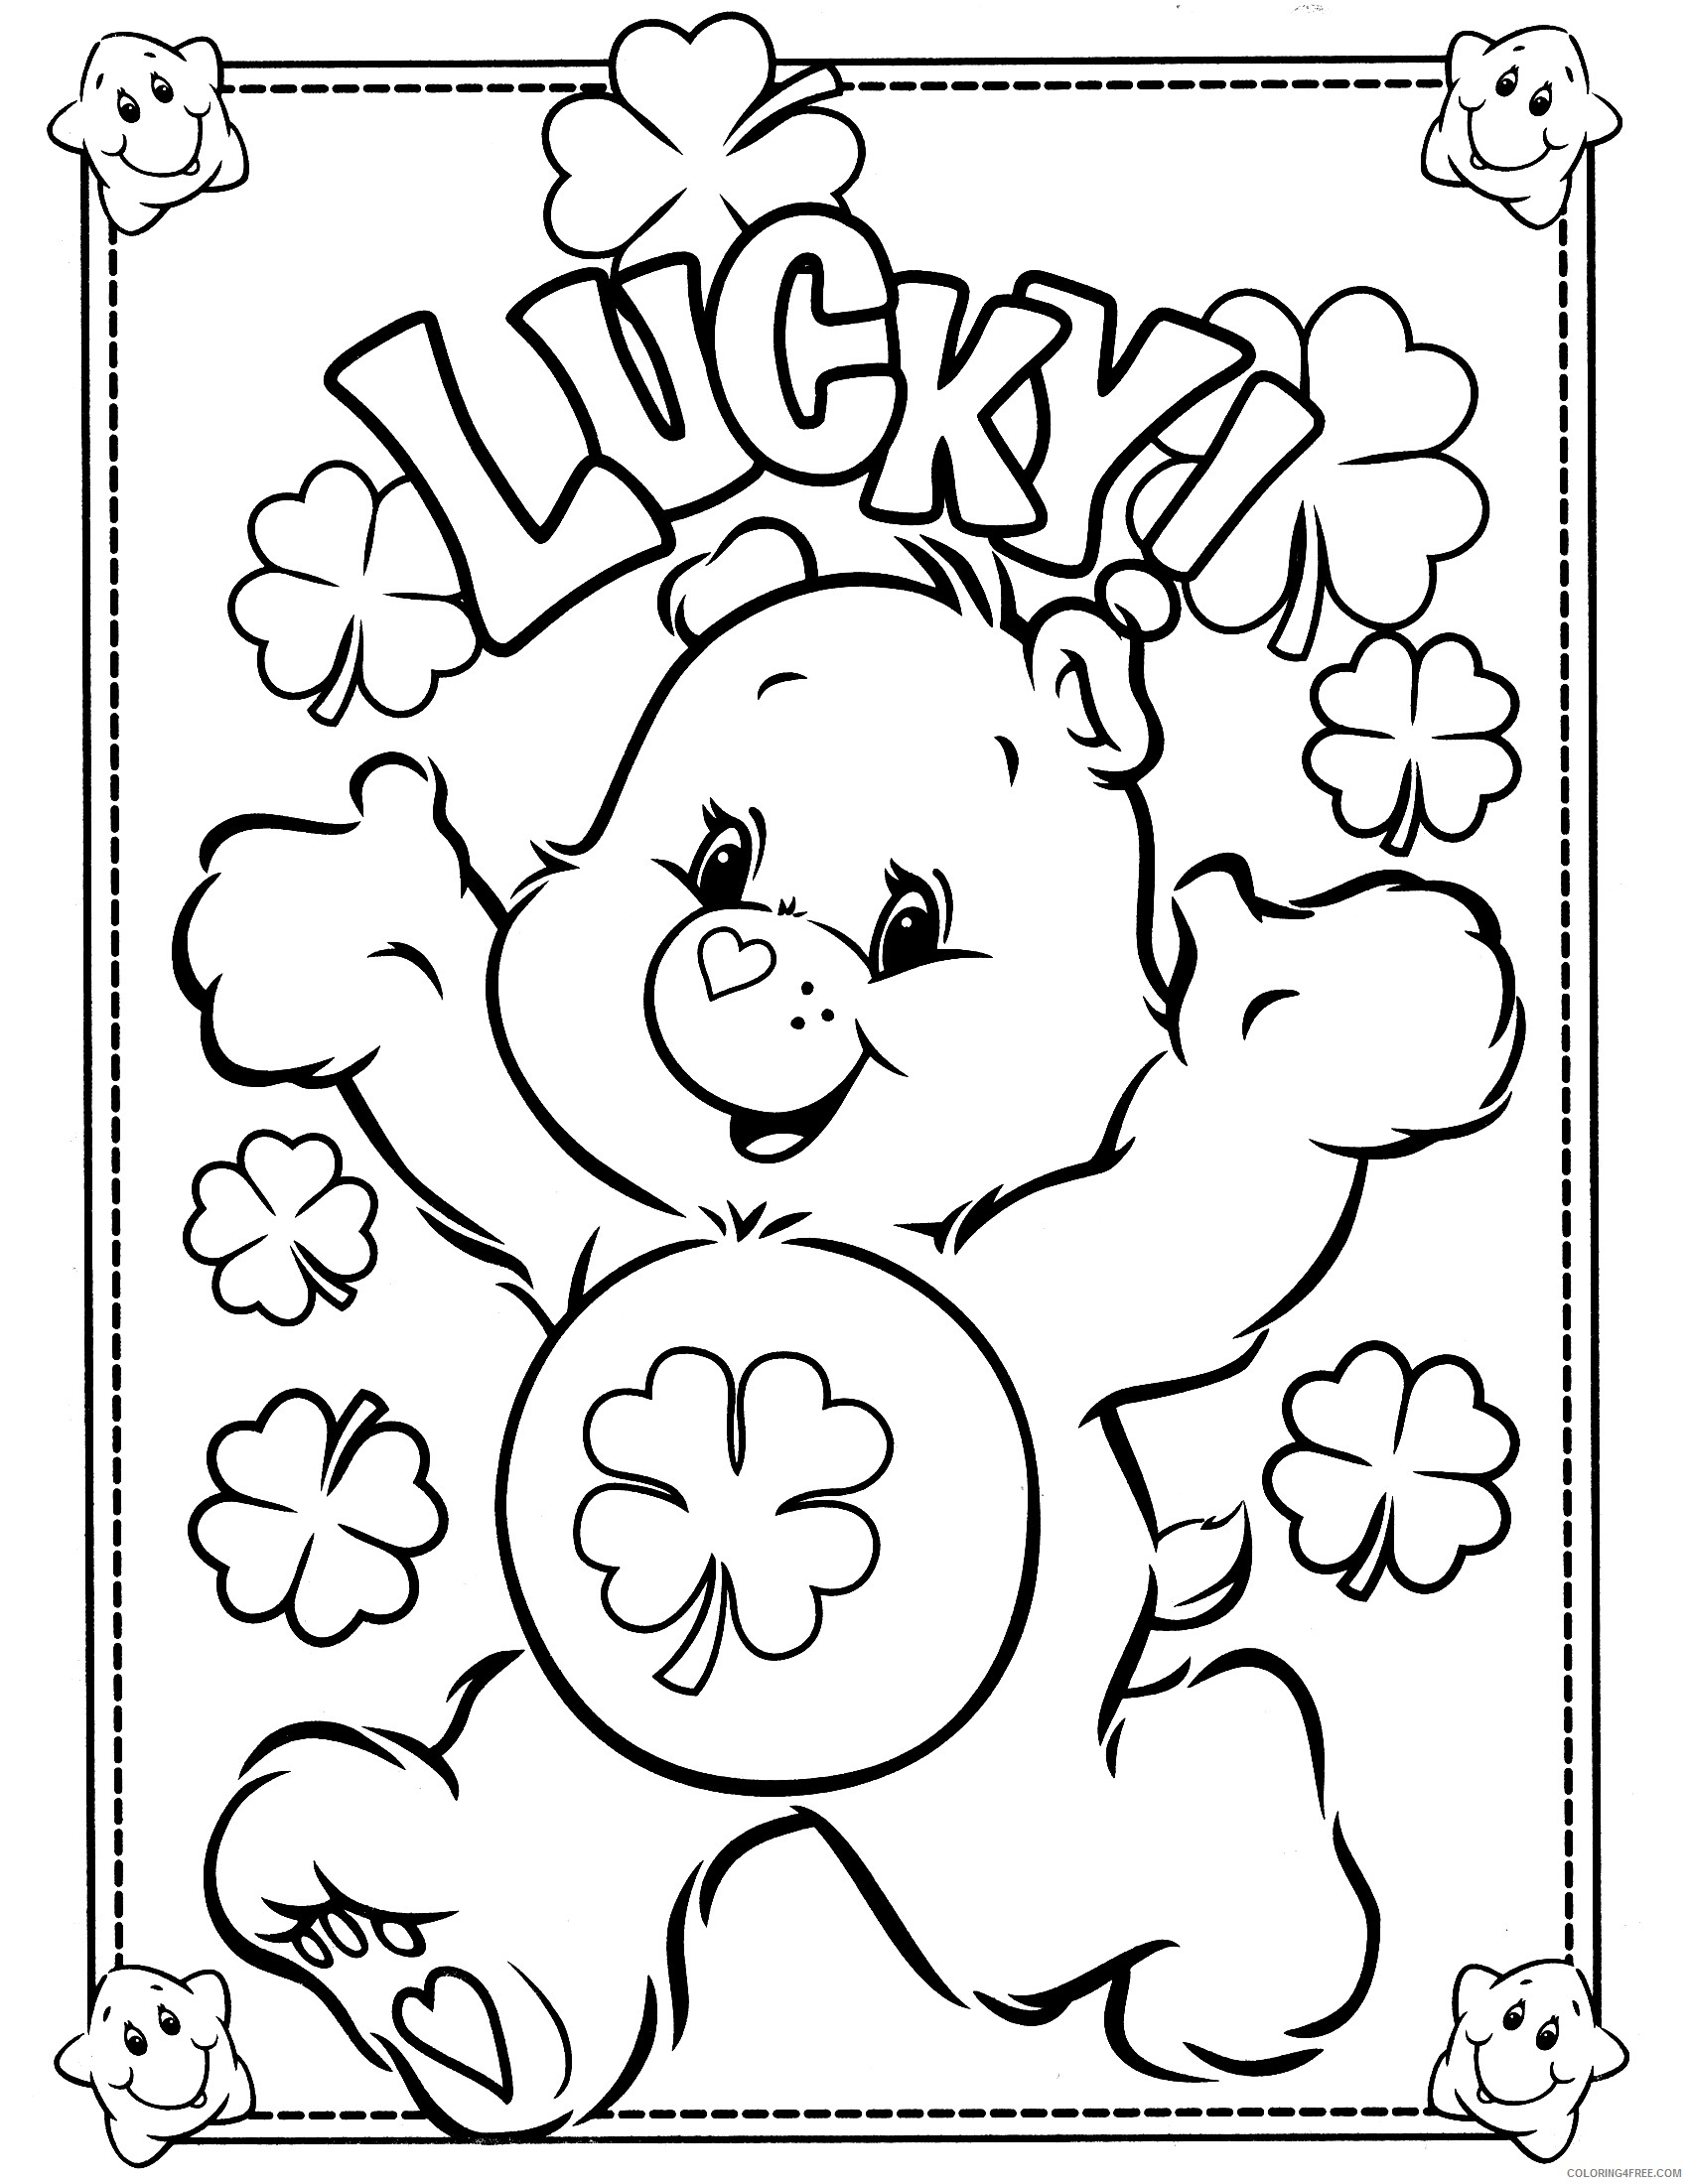 care bears coloring pages good luck Coloring4free